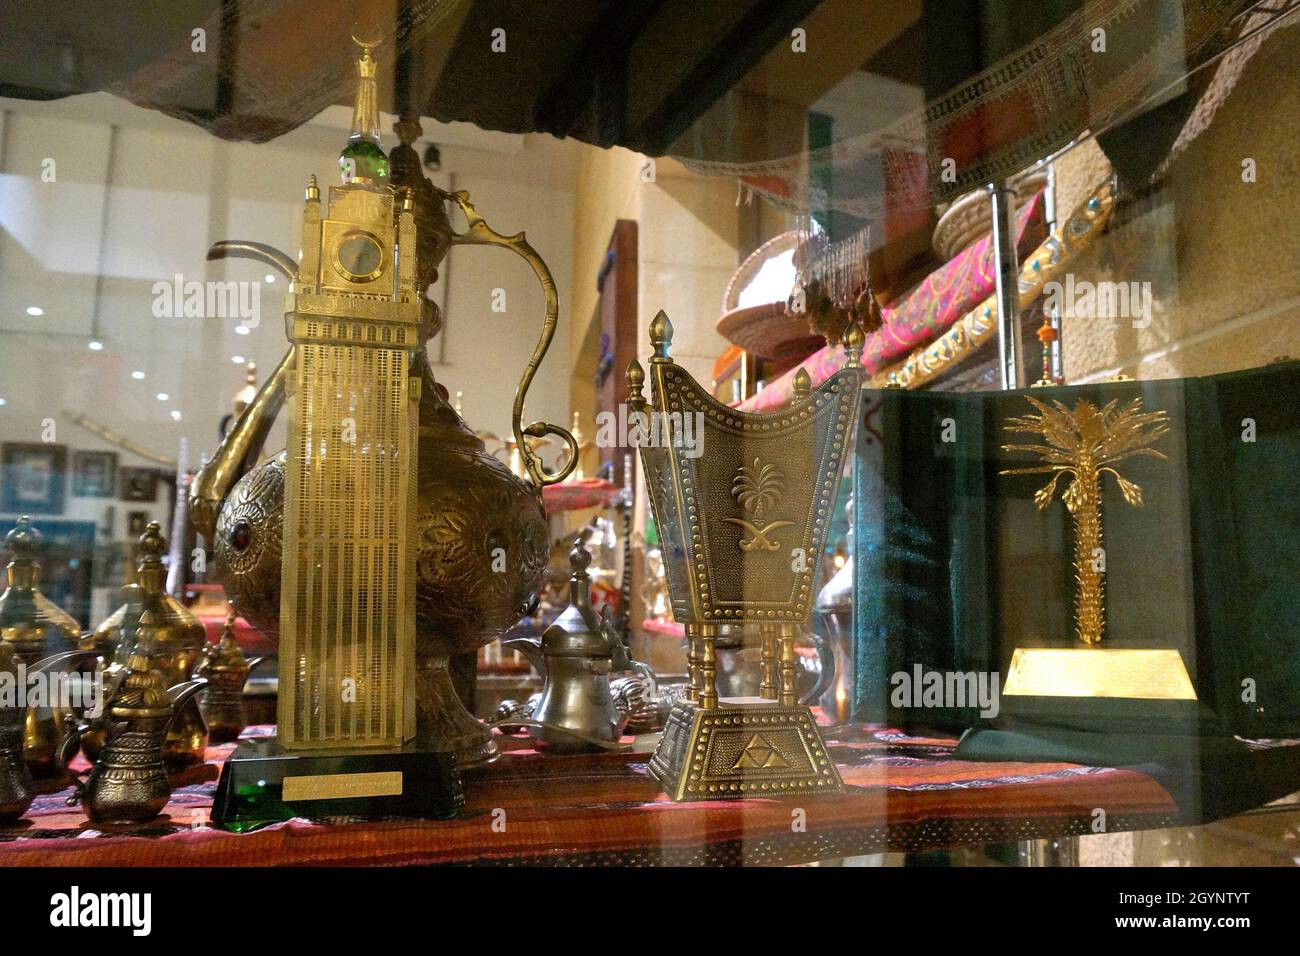 Golden Arabic items displayed in a shop. Photo taken in Riyadh, Saudi Arabia, Middle East on August 9, 2017. Stock Photo